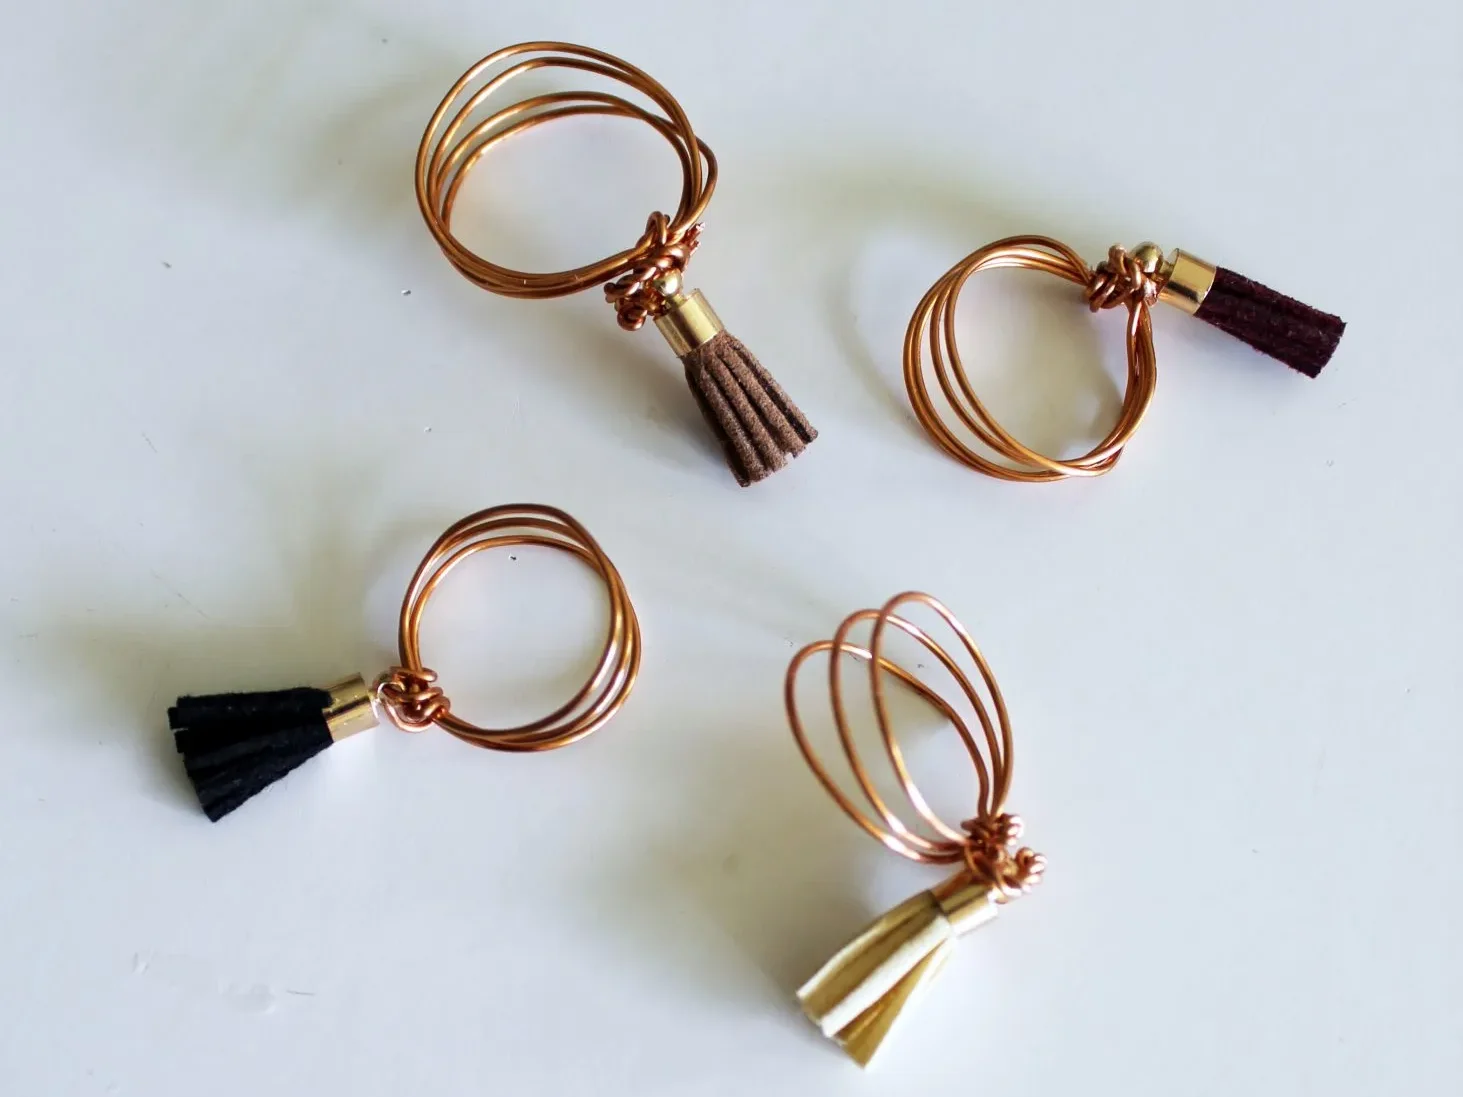 Wire Ring with Leather Tassels.